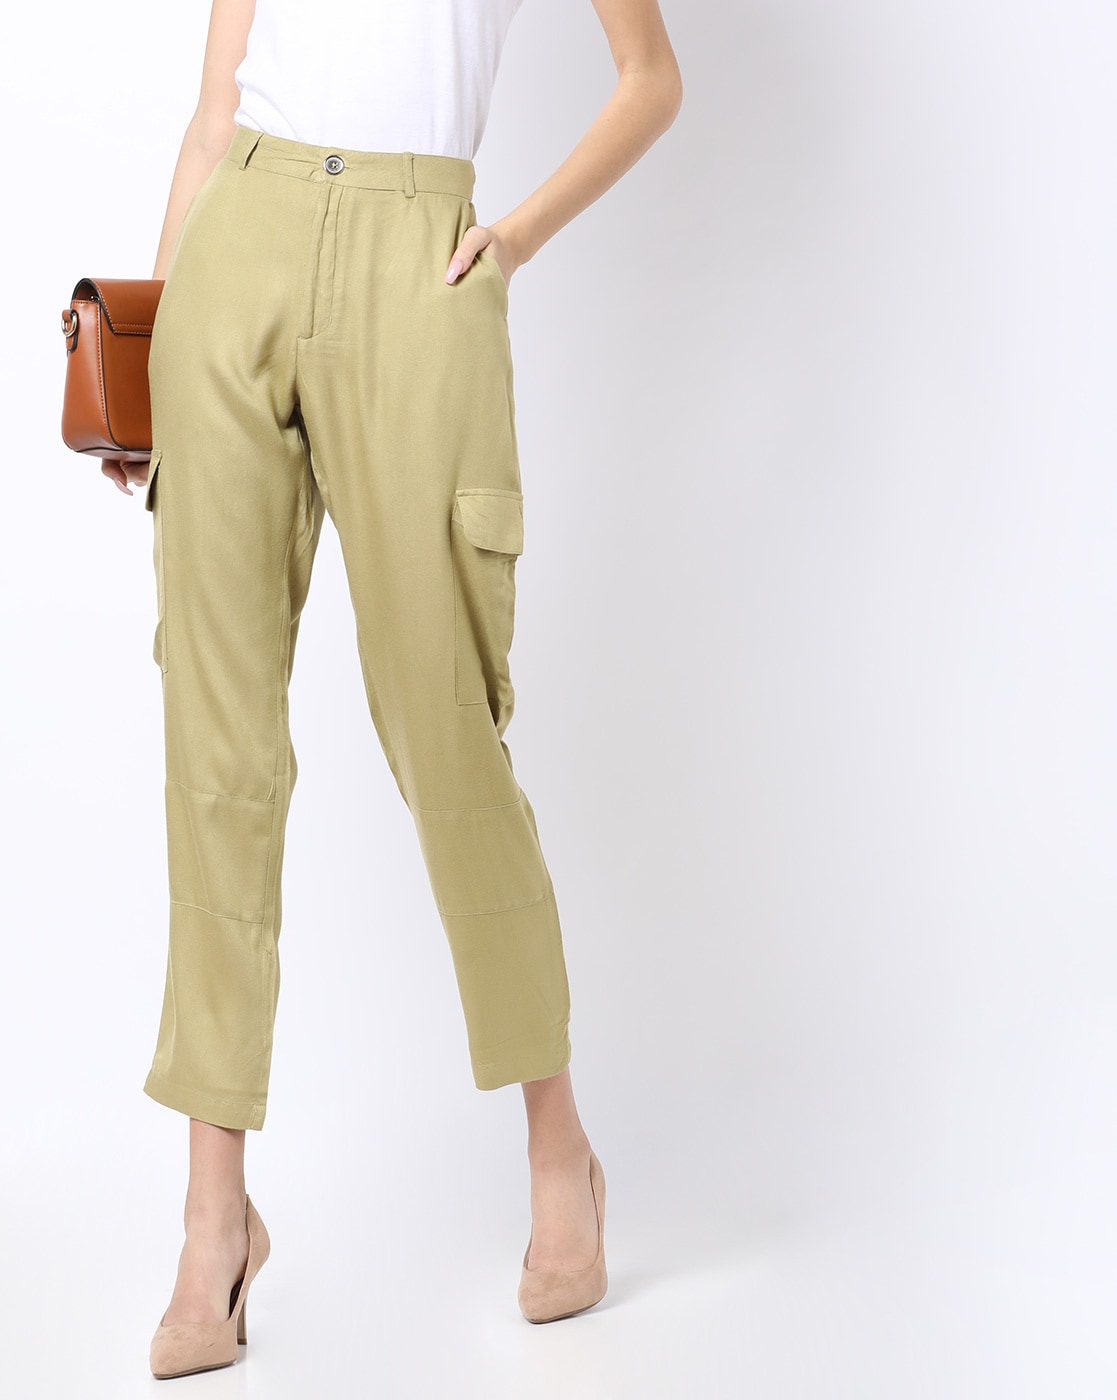 The Complete Pants Guide For Women Over 50 - Petite Dressing